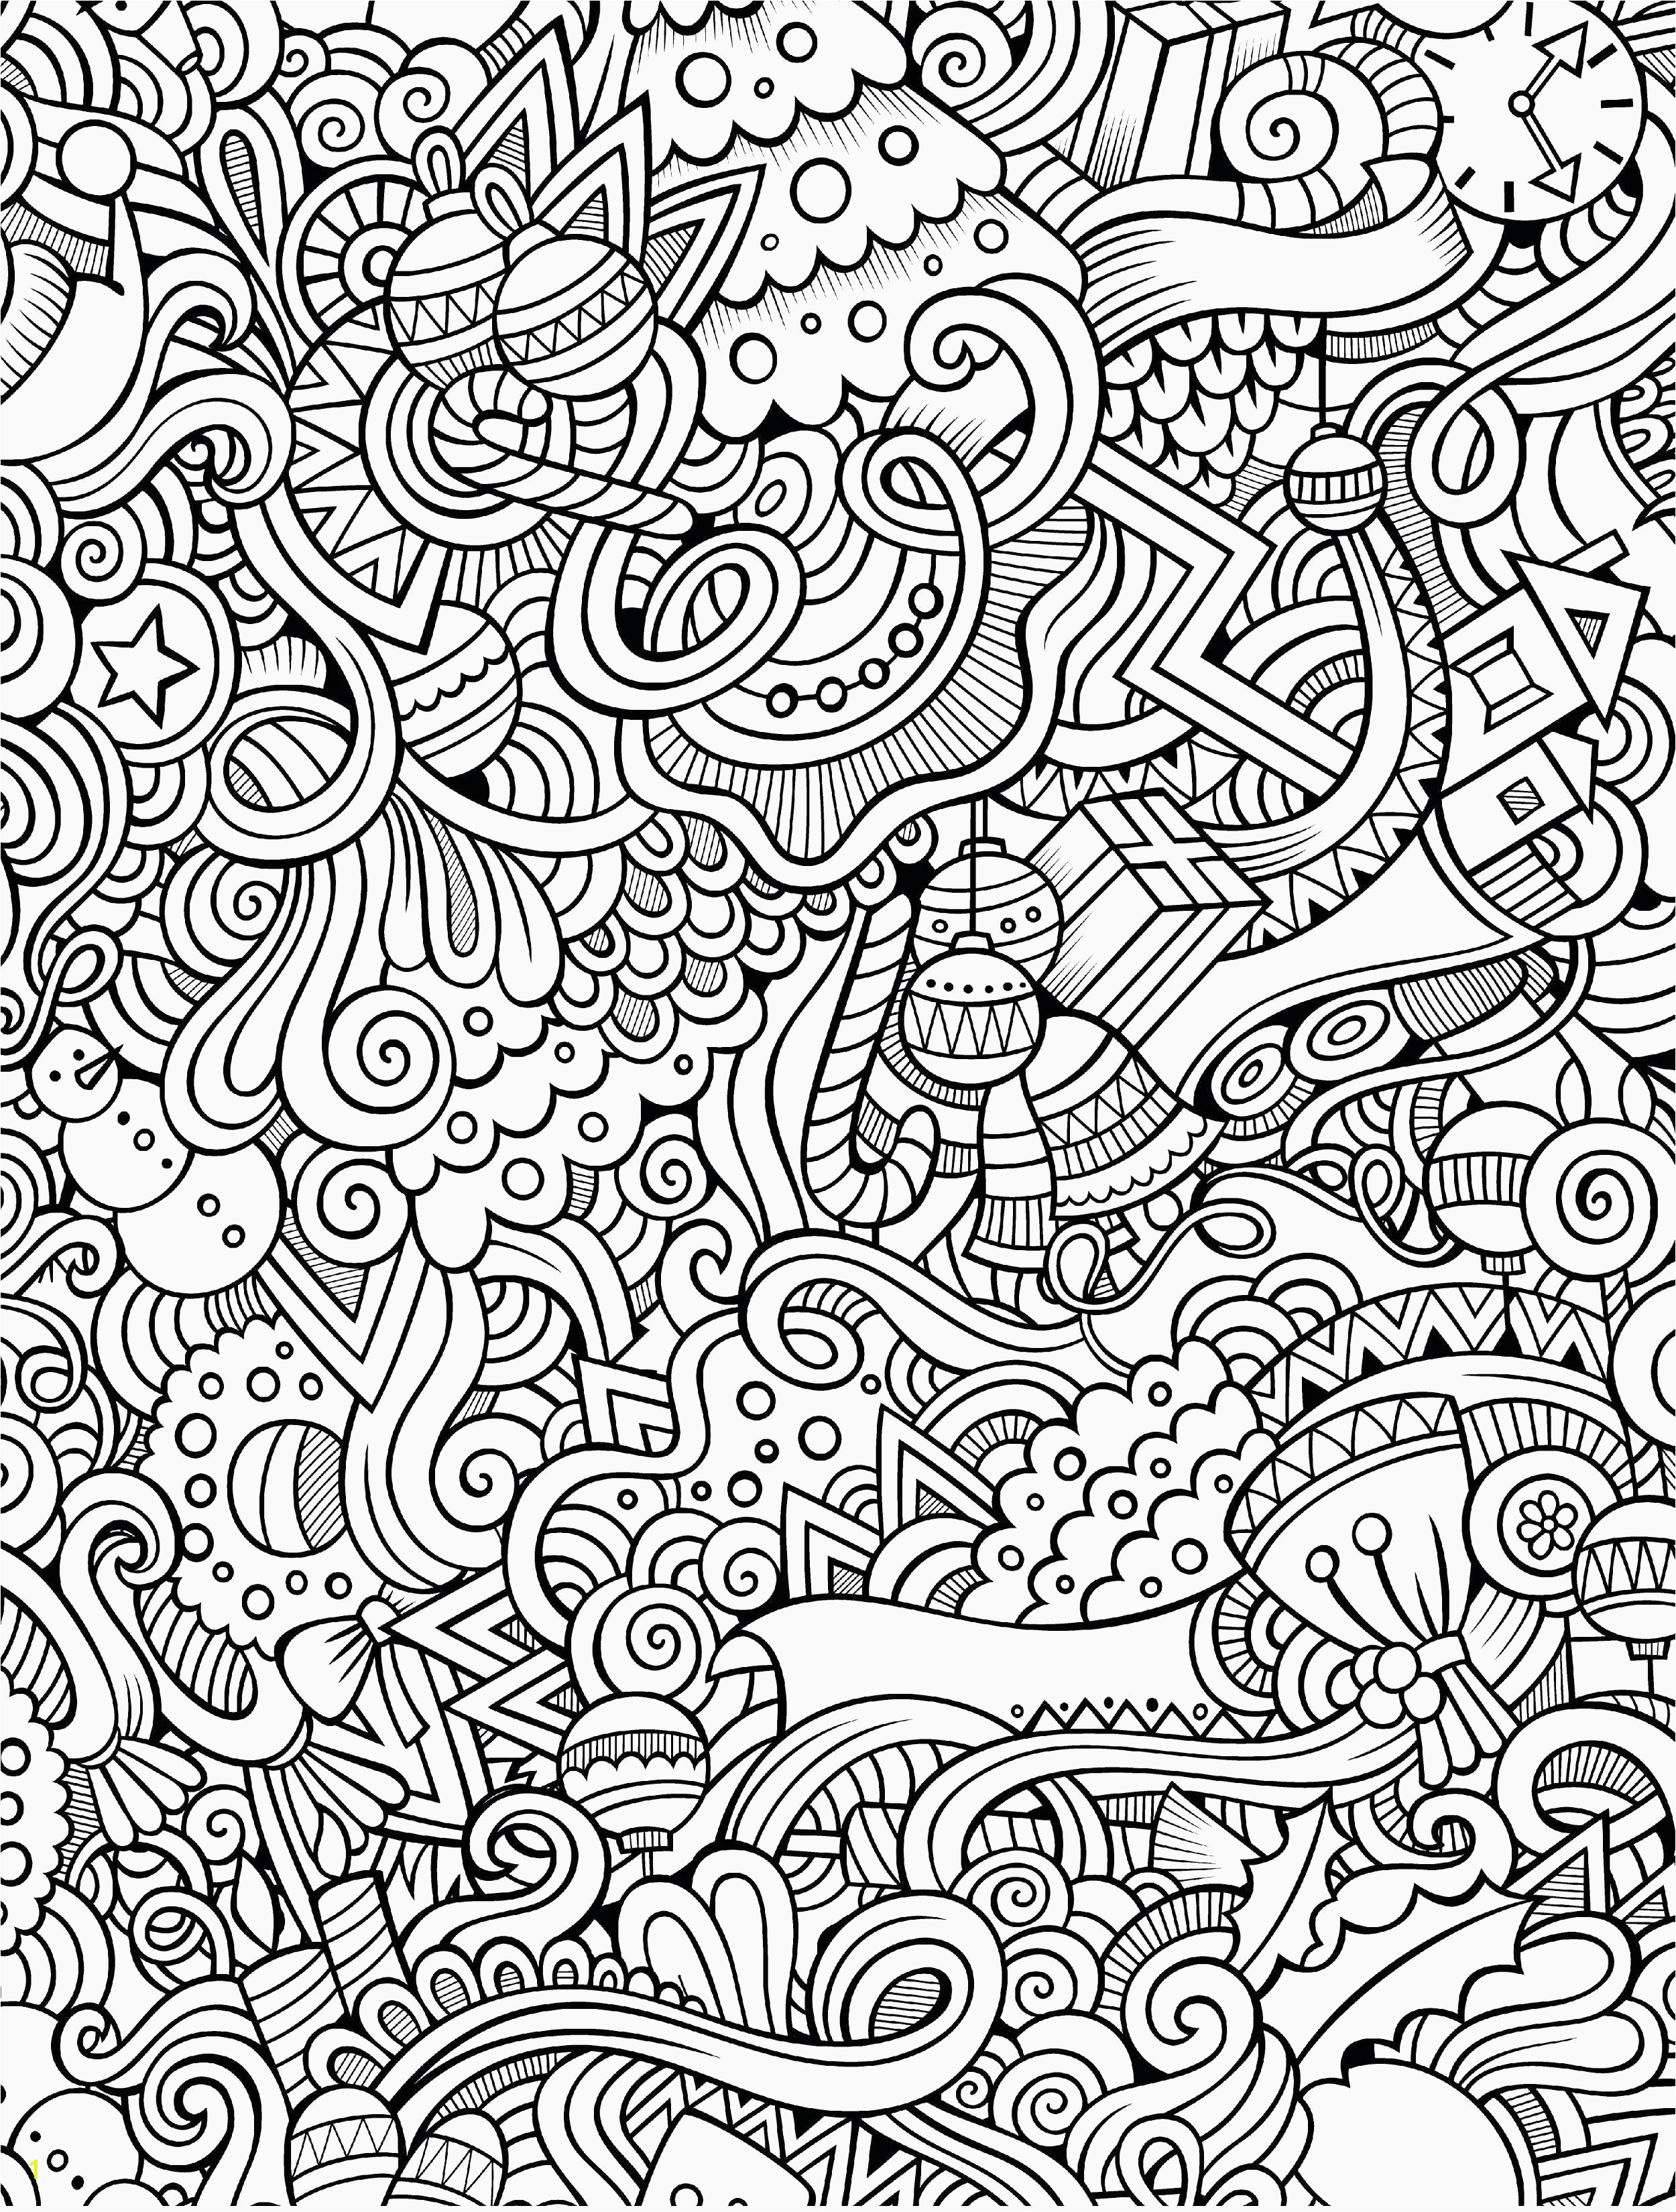 Difficult Coloring Pages Free Best Difficult Color by Number Coloring Pages for Adults